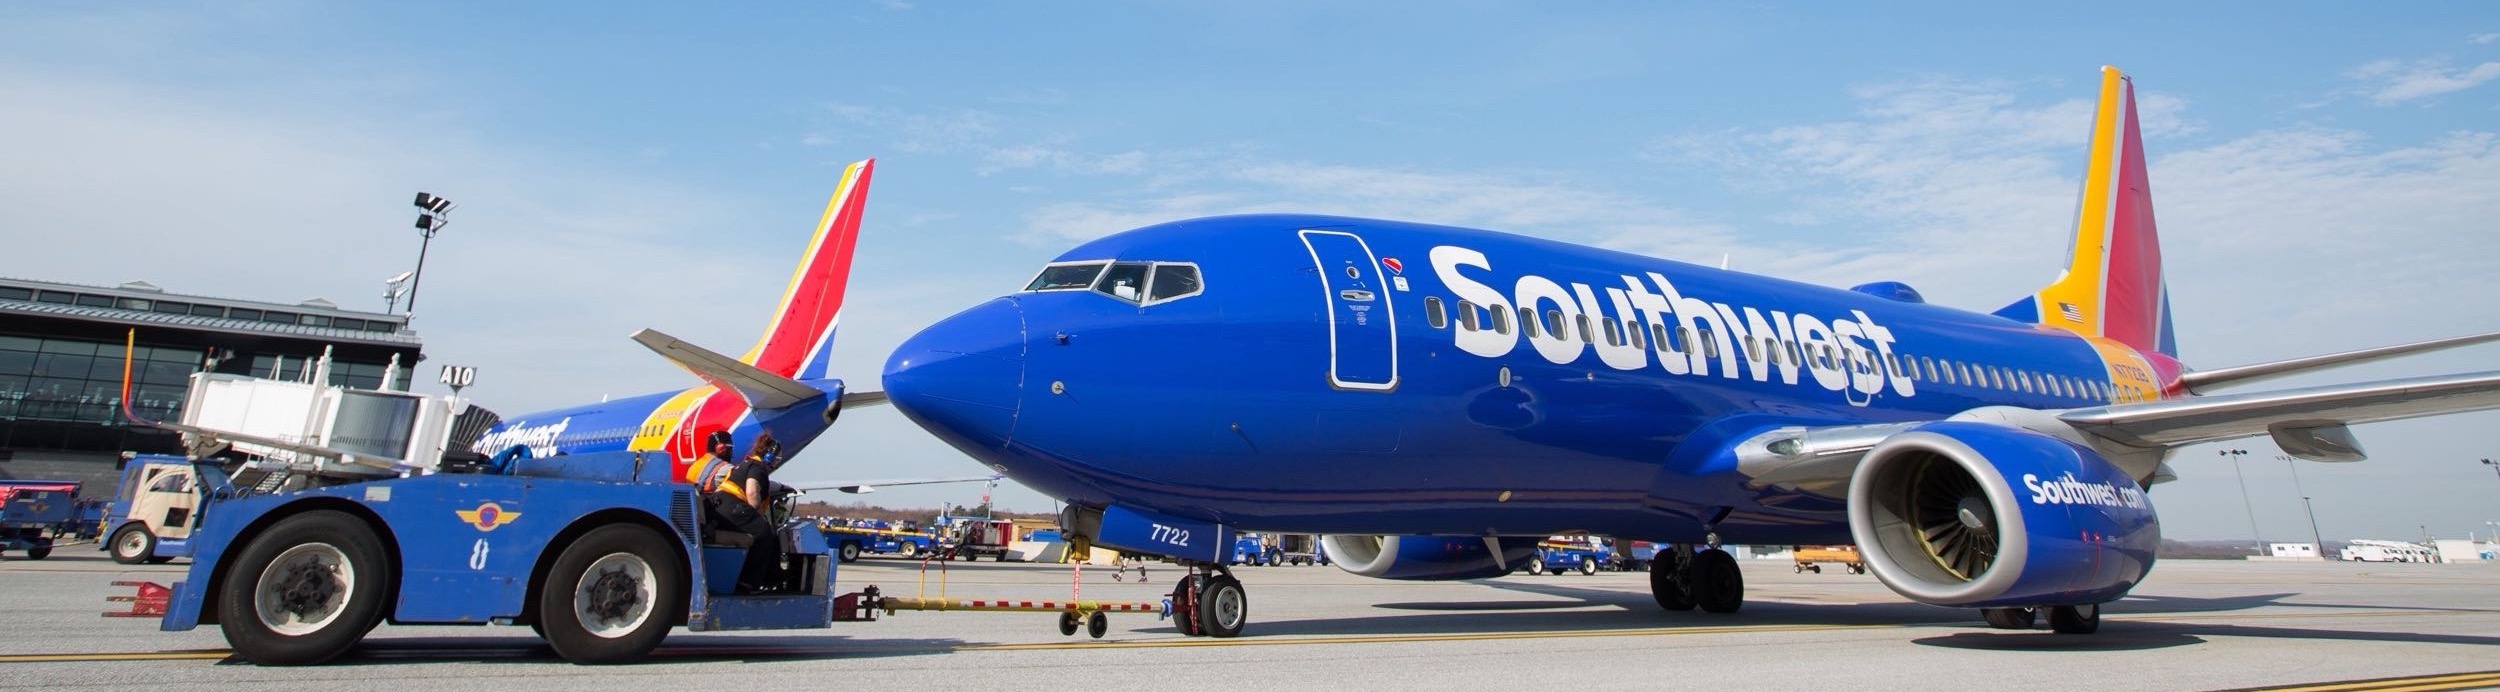 Airport Information | Southwest Airlines